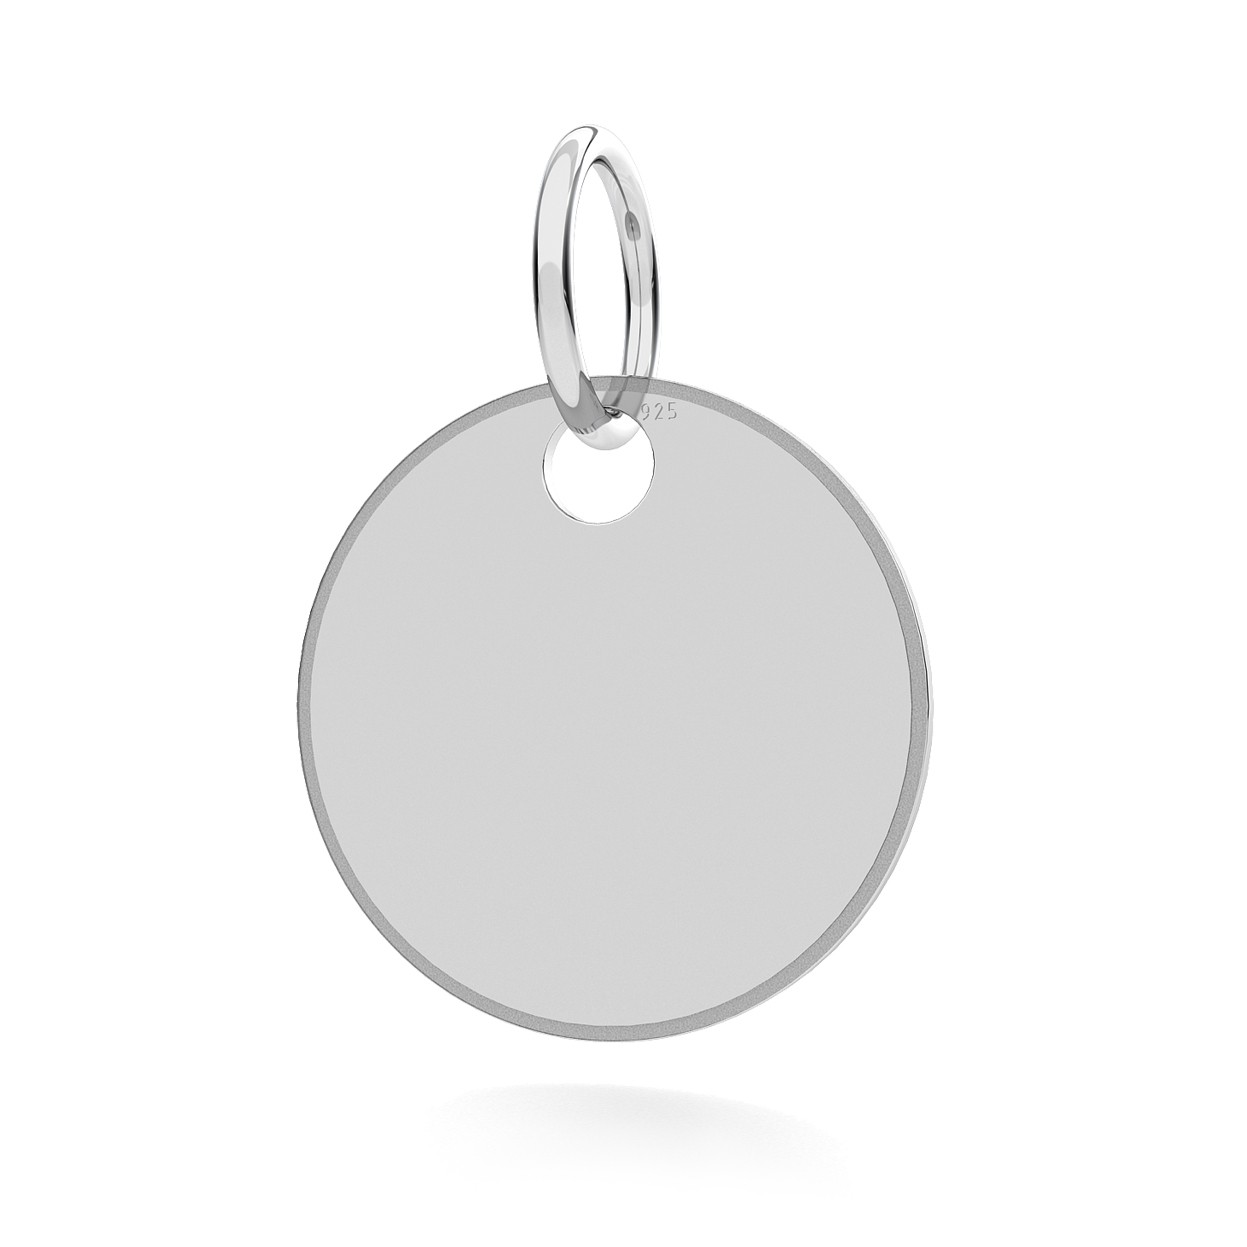 ROUND ANIMAL ID PENDANT WITH ENGRAVED, STERLING SILVER, MODEL 2